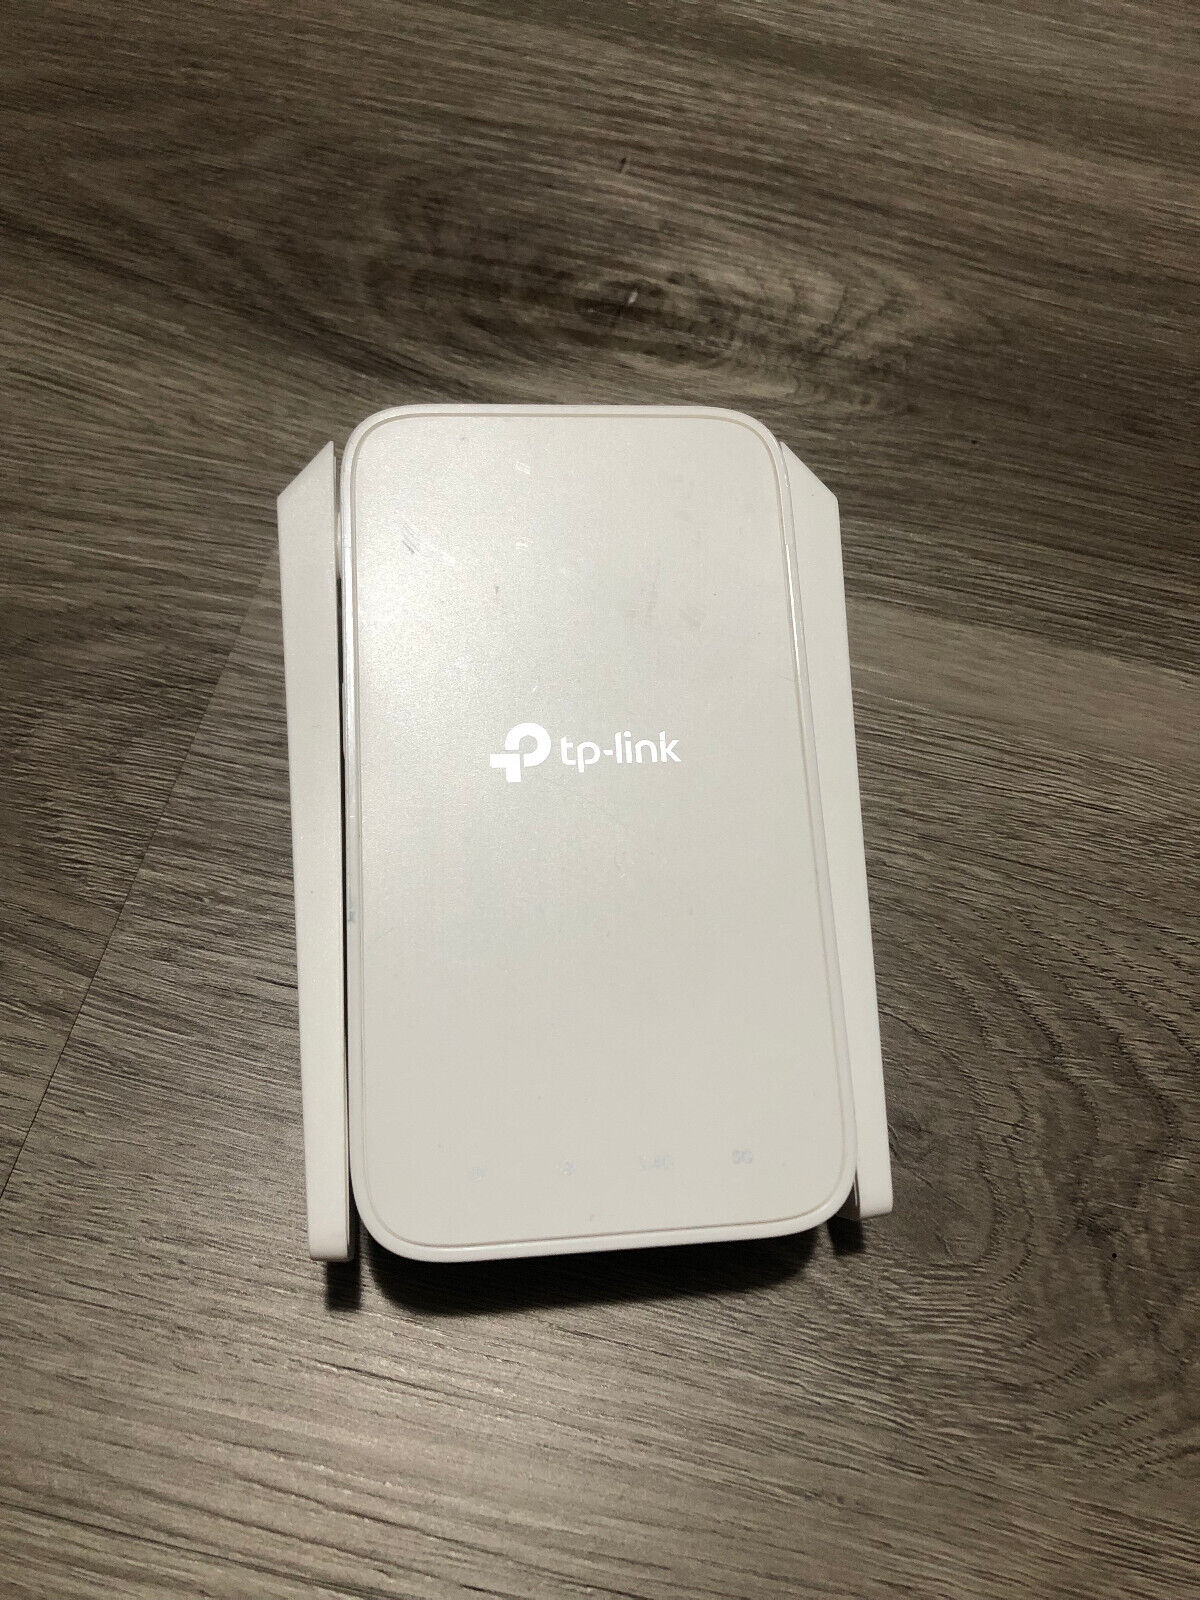 TP-Link AC1200 WiFi Extender (RE315) Covers 1500 Sq Ft Tested Works